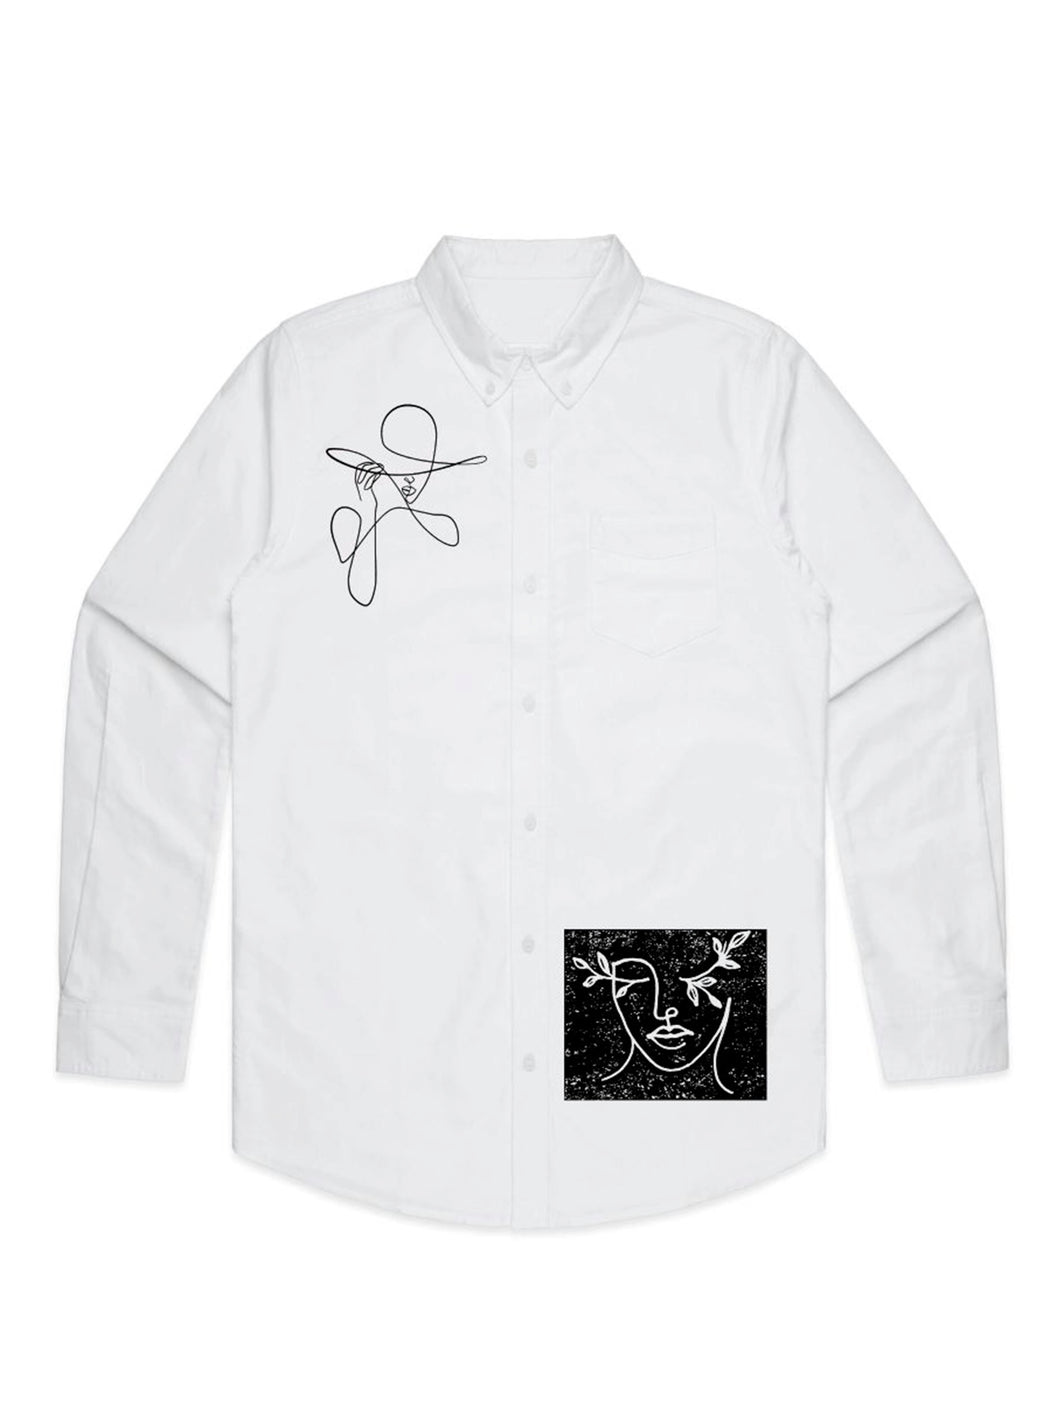 Unisex White Organic Cotton Button Up Shirt - 3 One Line Drawings